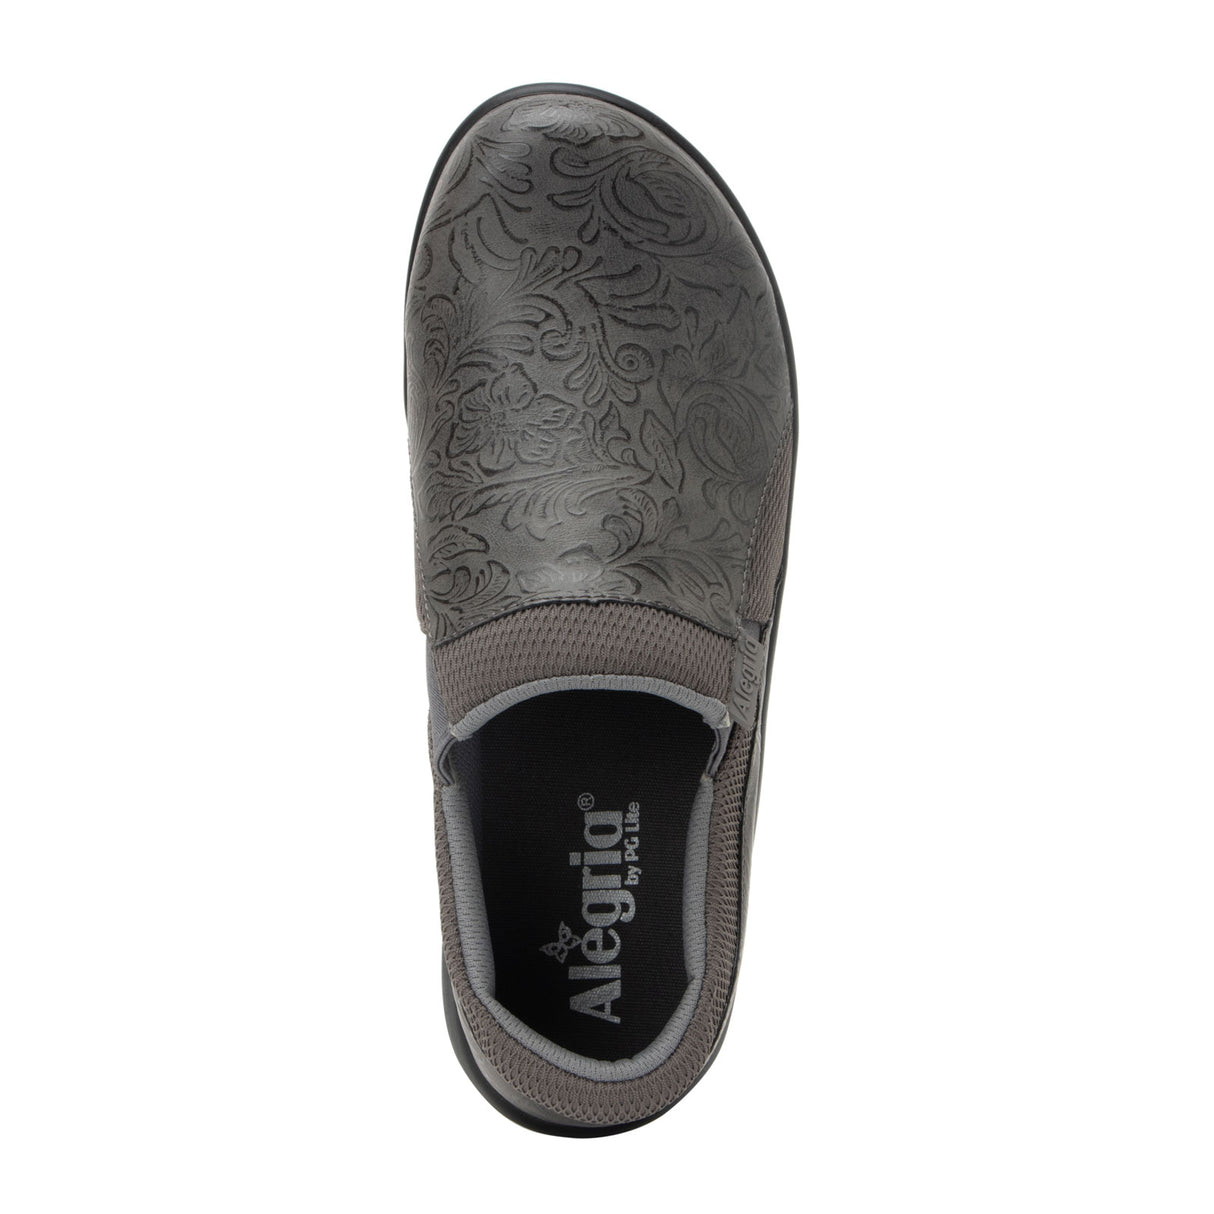 Alegria Duette Slip On (Women) - Aged Ash Dress-Casual - Slip Ons - The Heel Shoe Fitters